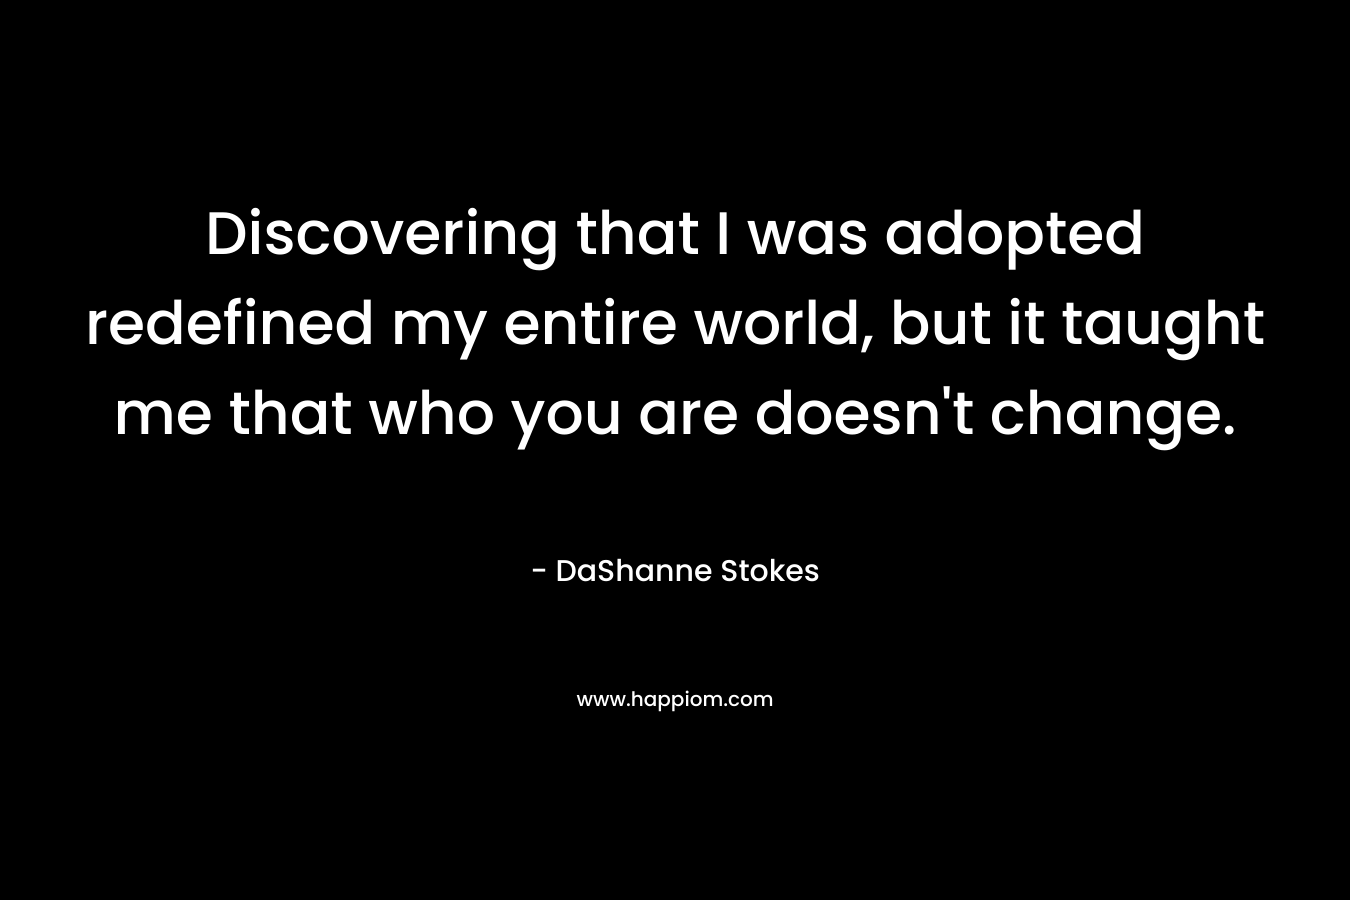 Discovering that I was adopted redefined my entire world, but it taught me that who you are doesn’t change. – DaShanne Stokes